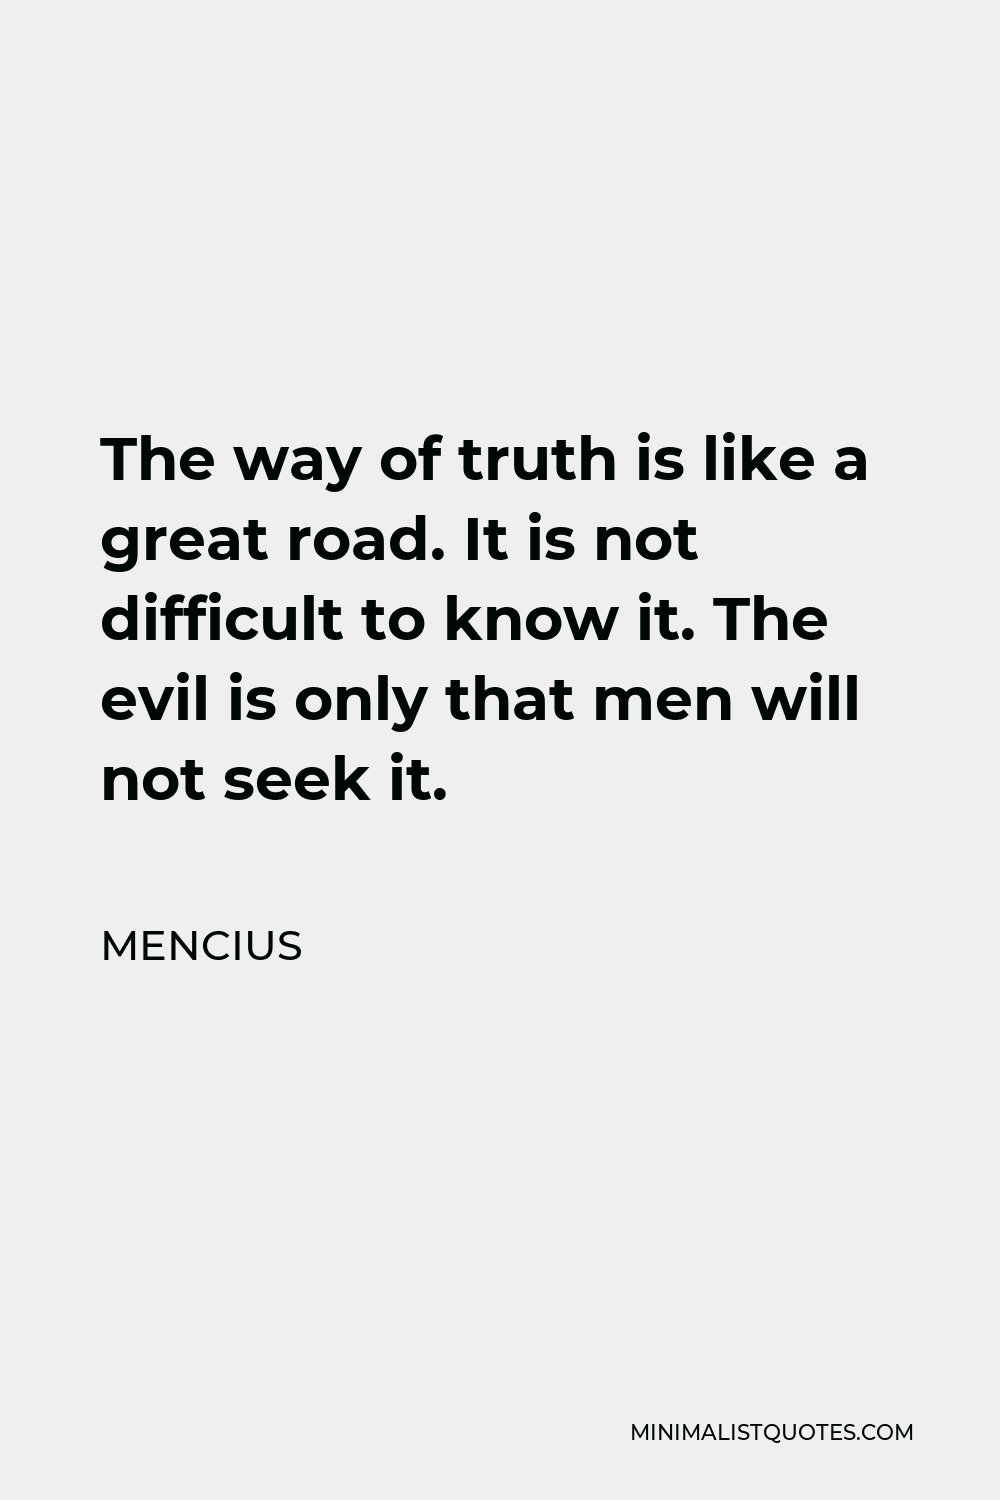 Mencius Quote - The way of truth is like a great road. It is not difficult to know it. The evil is only that men will not seek it.